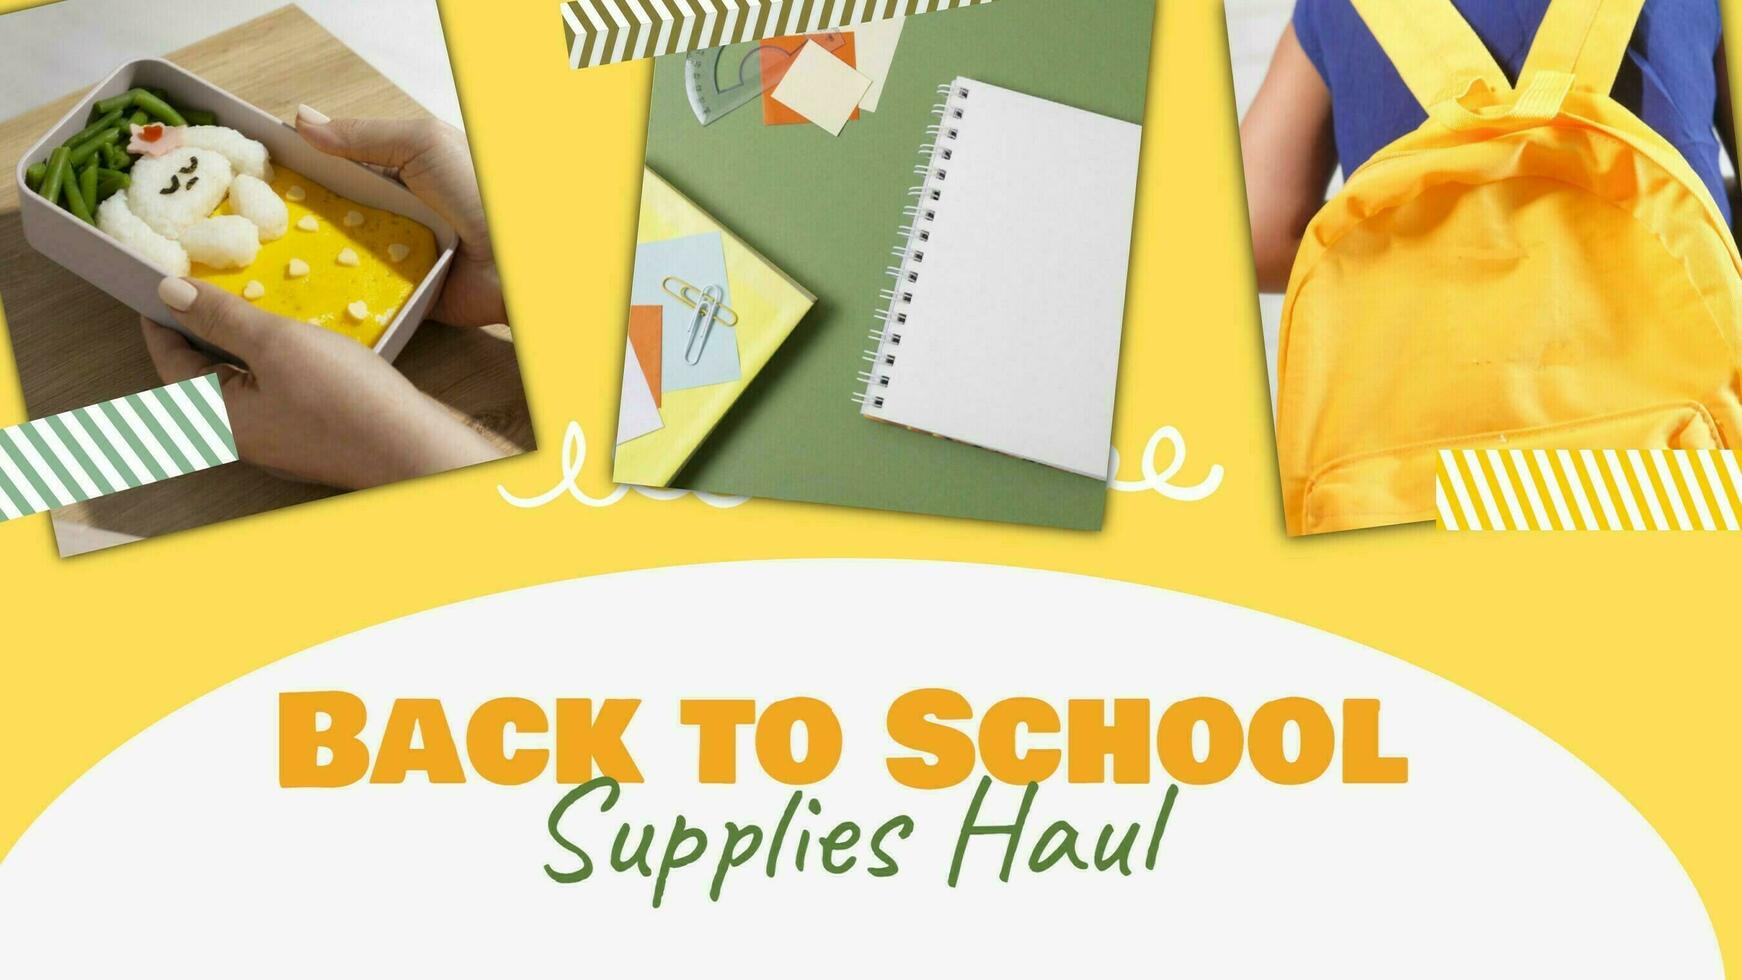 Back to School Supplies Haul template